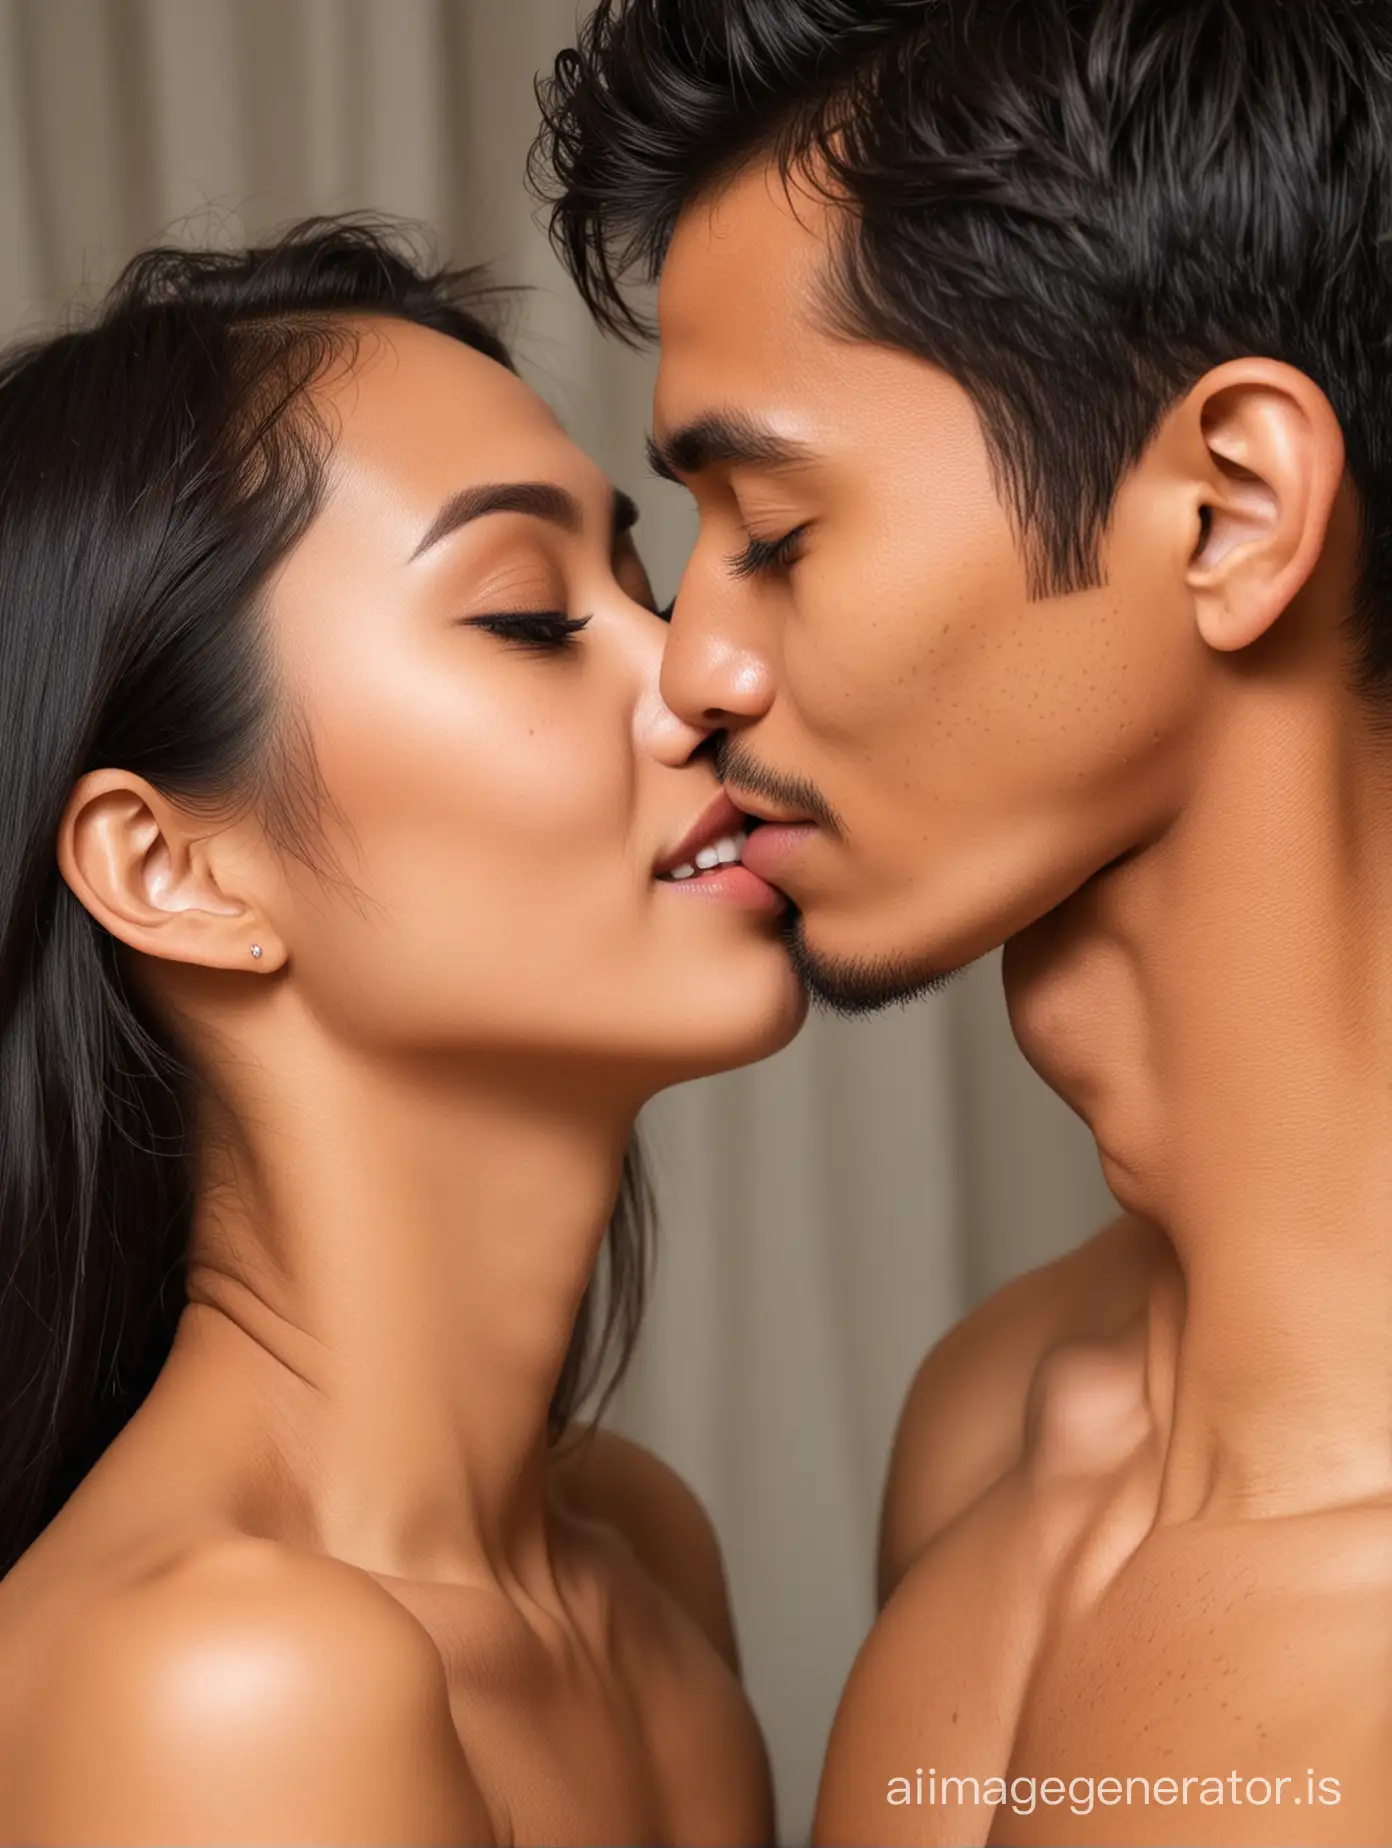 Young and beautiful Indonesian woman is kissing on his boyfriend cheek. He is shirtless